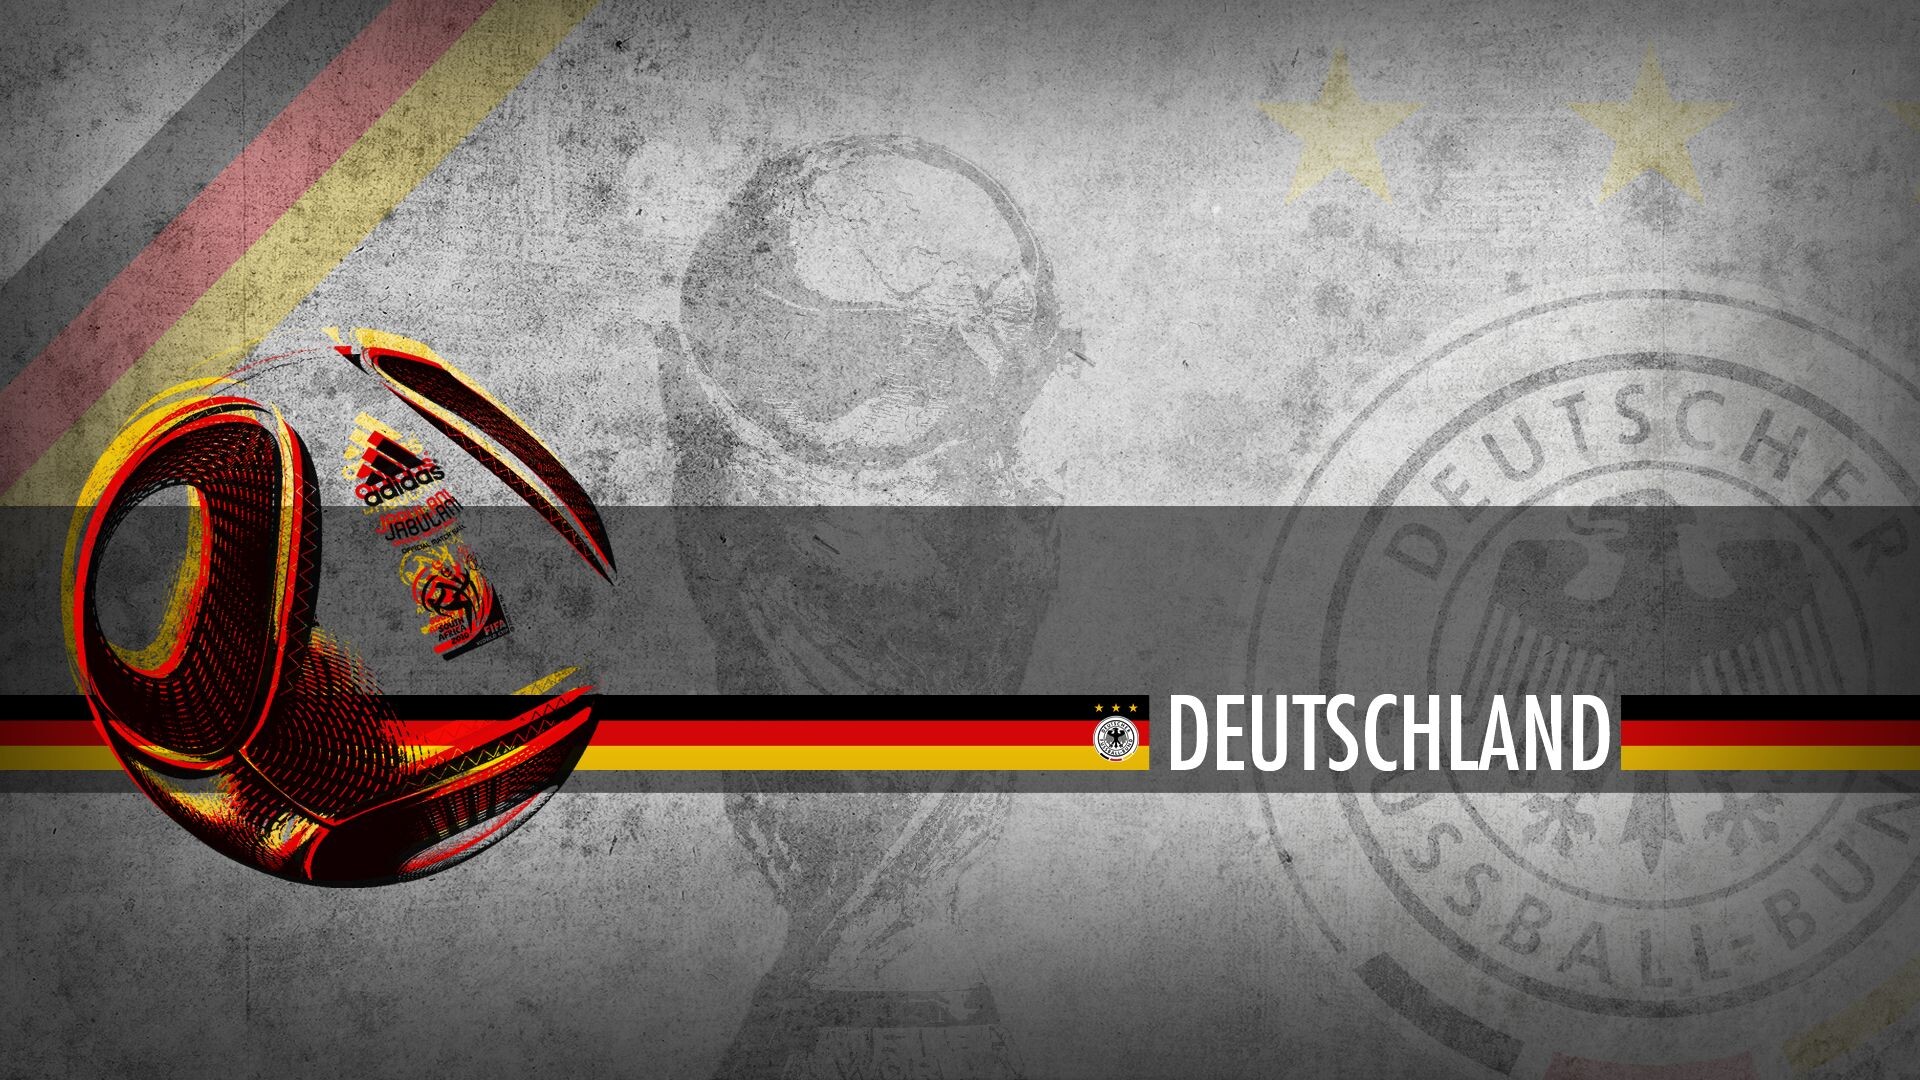 Germany National Football Team: The FIFA World Cup four-time champions, The main trophy, One of the most expensive trophies in sporting history. 1920x1080 Full HD Wallpaper.